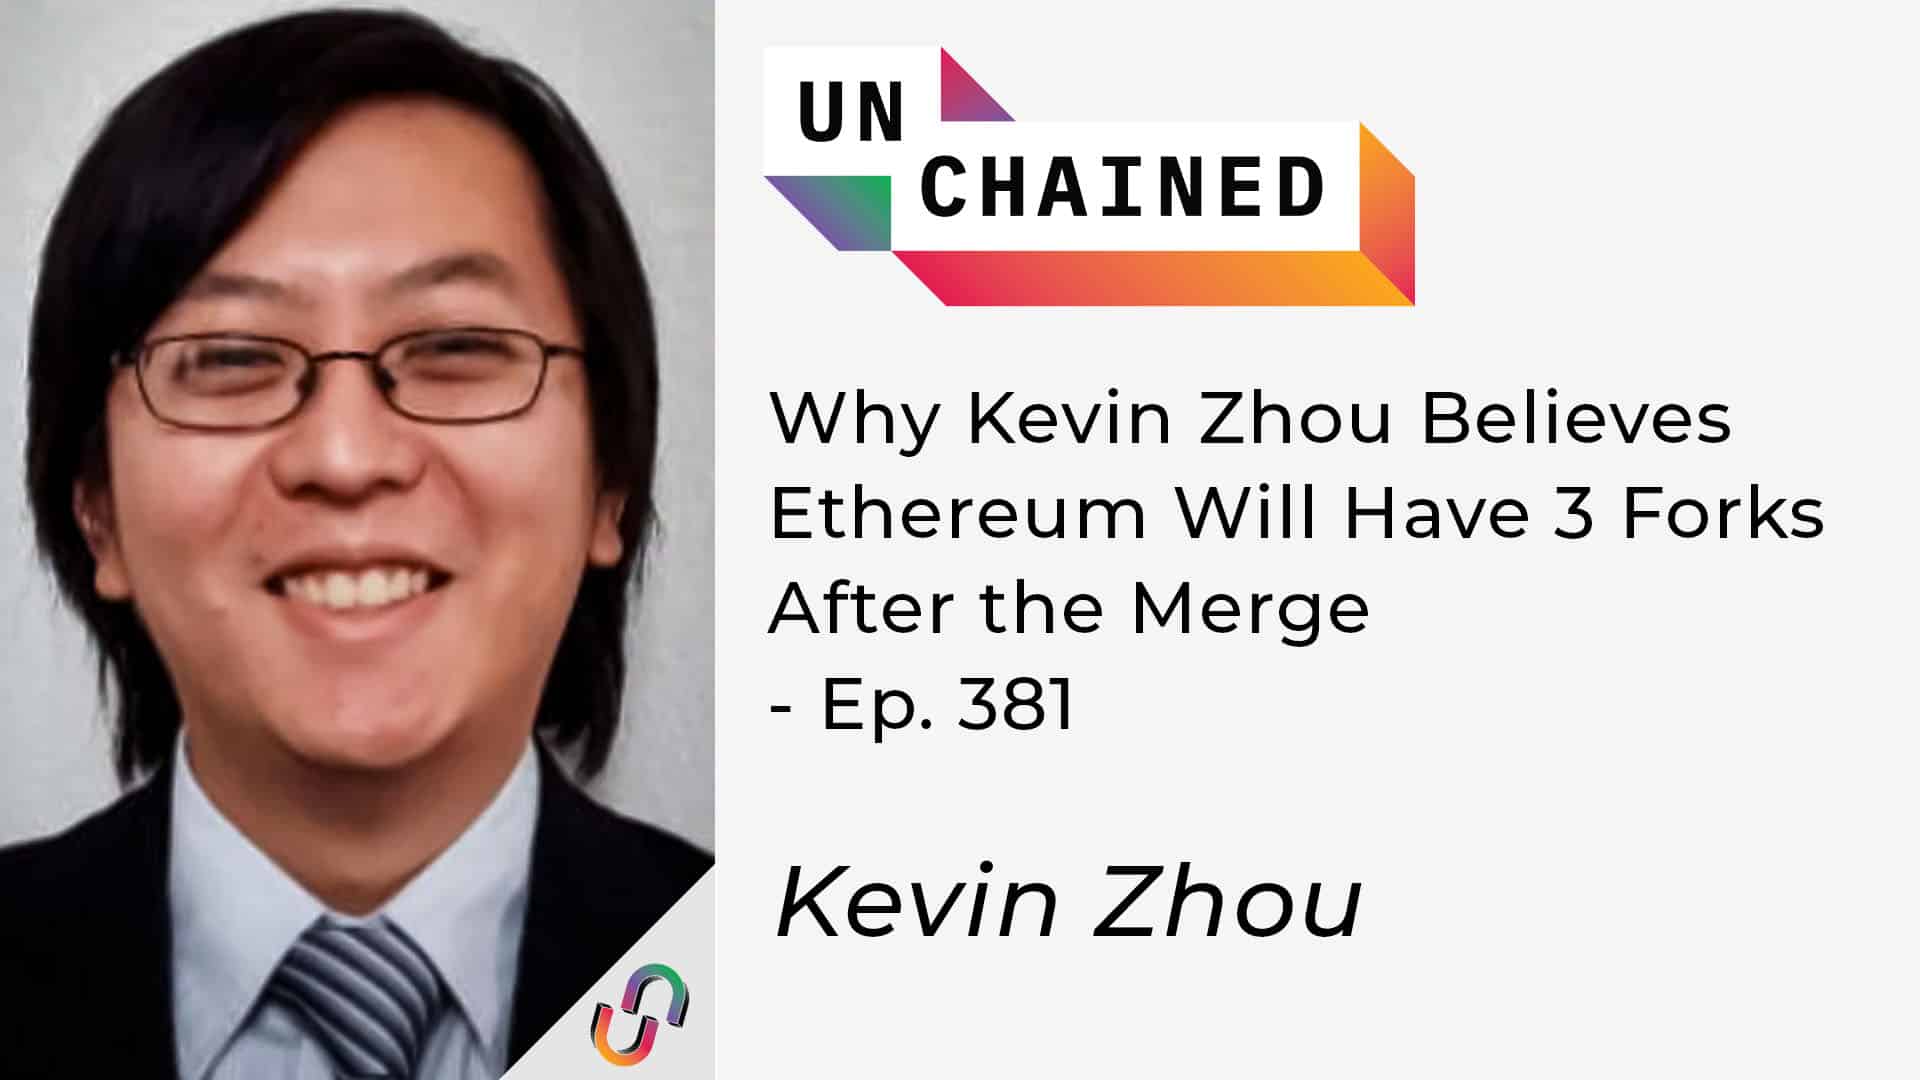 Why Kevin Zhou Believes Ethereum Will Have 3 Forks After the Merge - Ep. 381